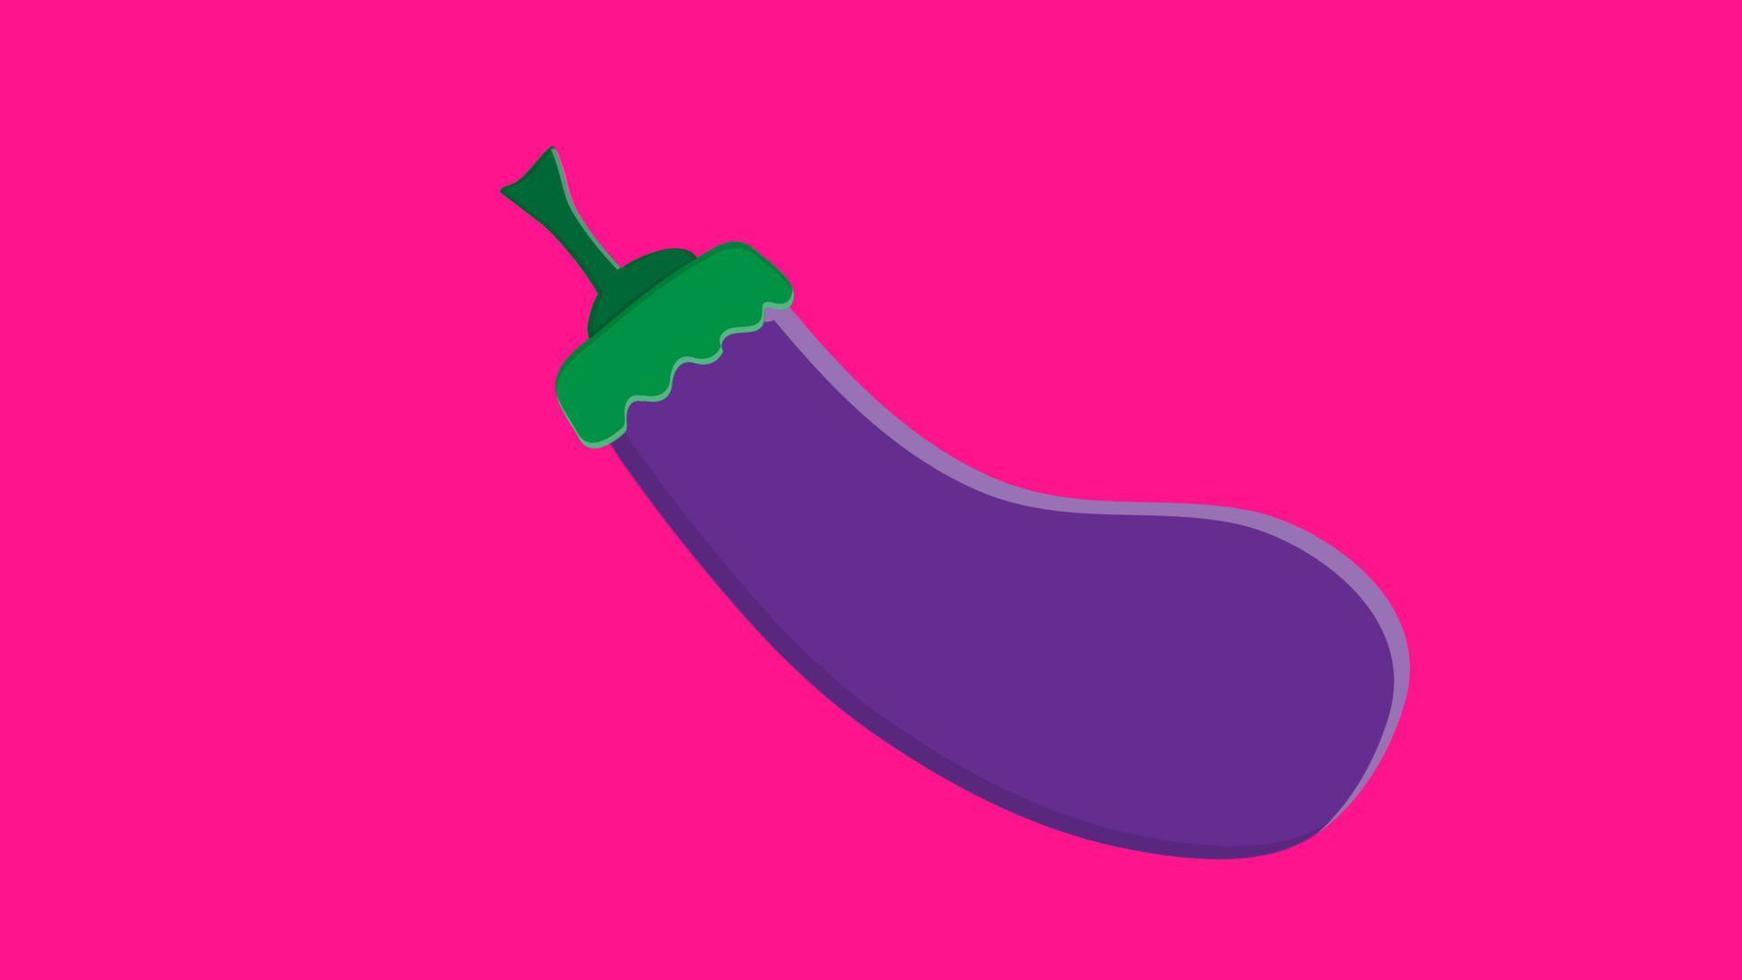 eggplant on a pink background, vector illustration. purple eggplant. vegetable for salad and eating. vegetarian food. weight loss and weight loss